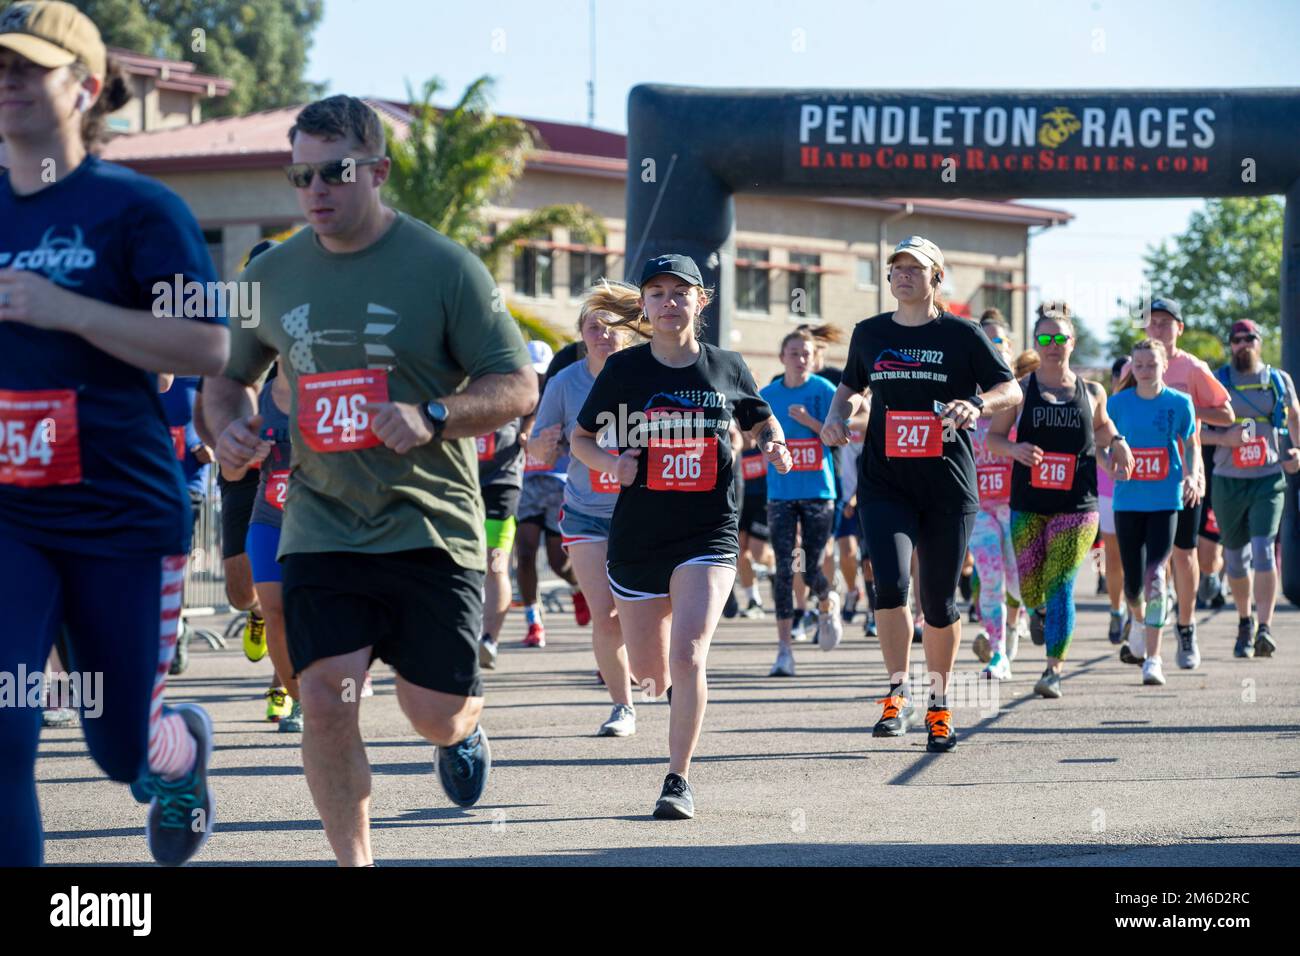 Marine Corps Base Camp Pendleton service members and their families participate in the 10-kilometer run event during the Heartbreak Ridge Run at the Las Pulgas parade deck on Camp Pendleton, California, April 23, 2022. The Heartbreak Ridge Run is part of Marine Corps Community Services Camp Pendletons’ Hard Corps Race Series, which offers multiple competitive races and family fitness events throughout the year for Camp Pendleton active duty service members, their dependents, retirees, and other authorized base patrons. Stock Photo